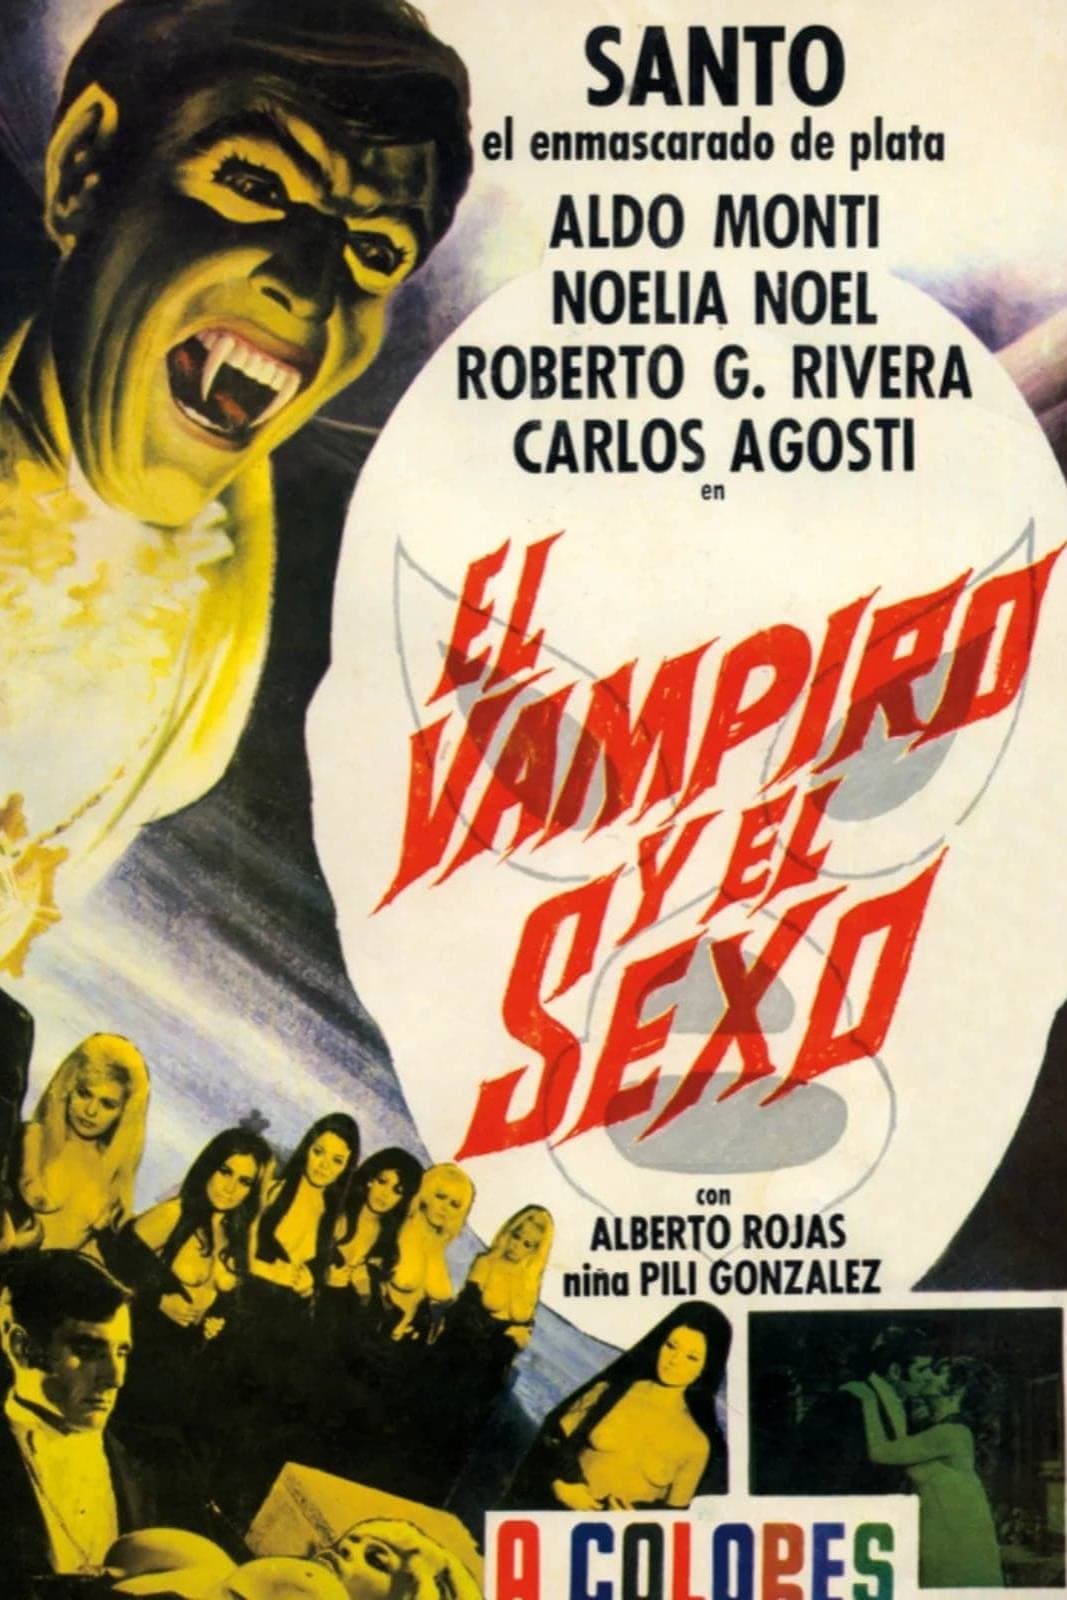 The Vampire and Sex